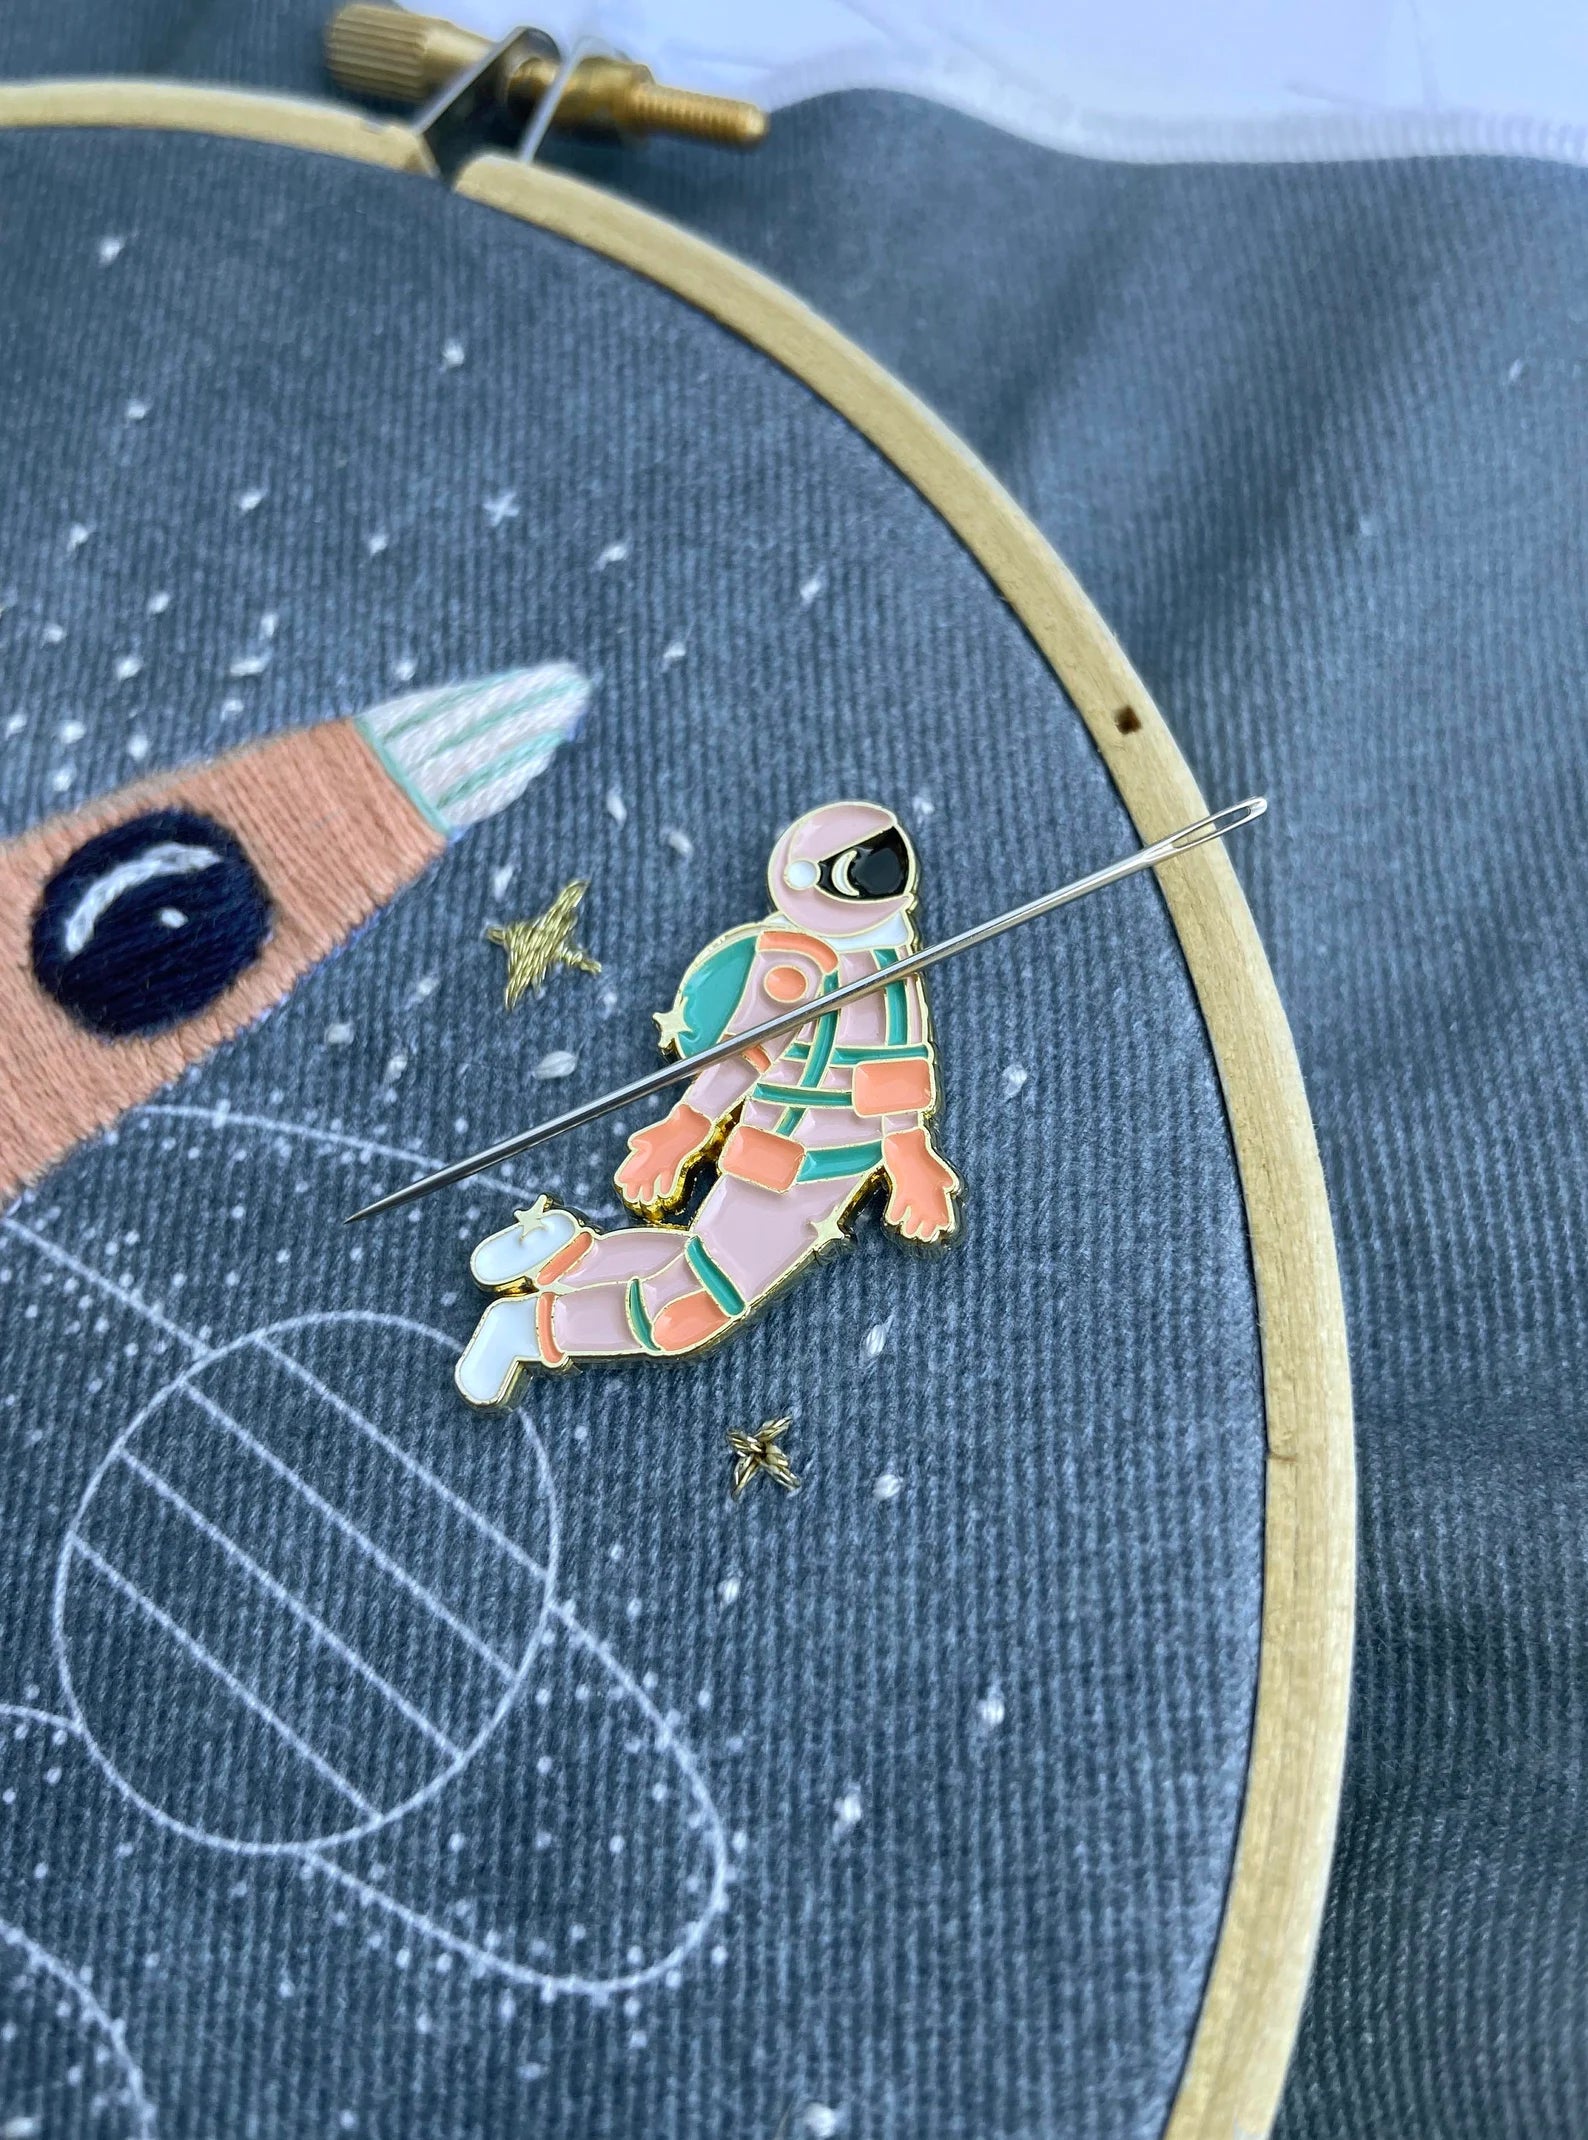 Using Needle Minders in Embroidery